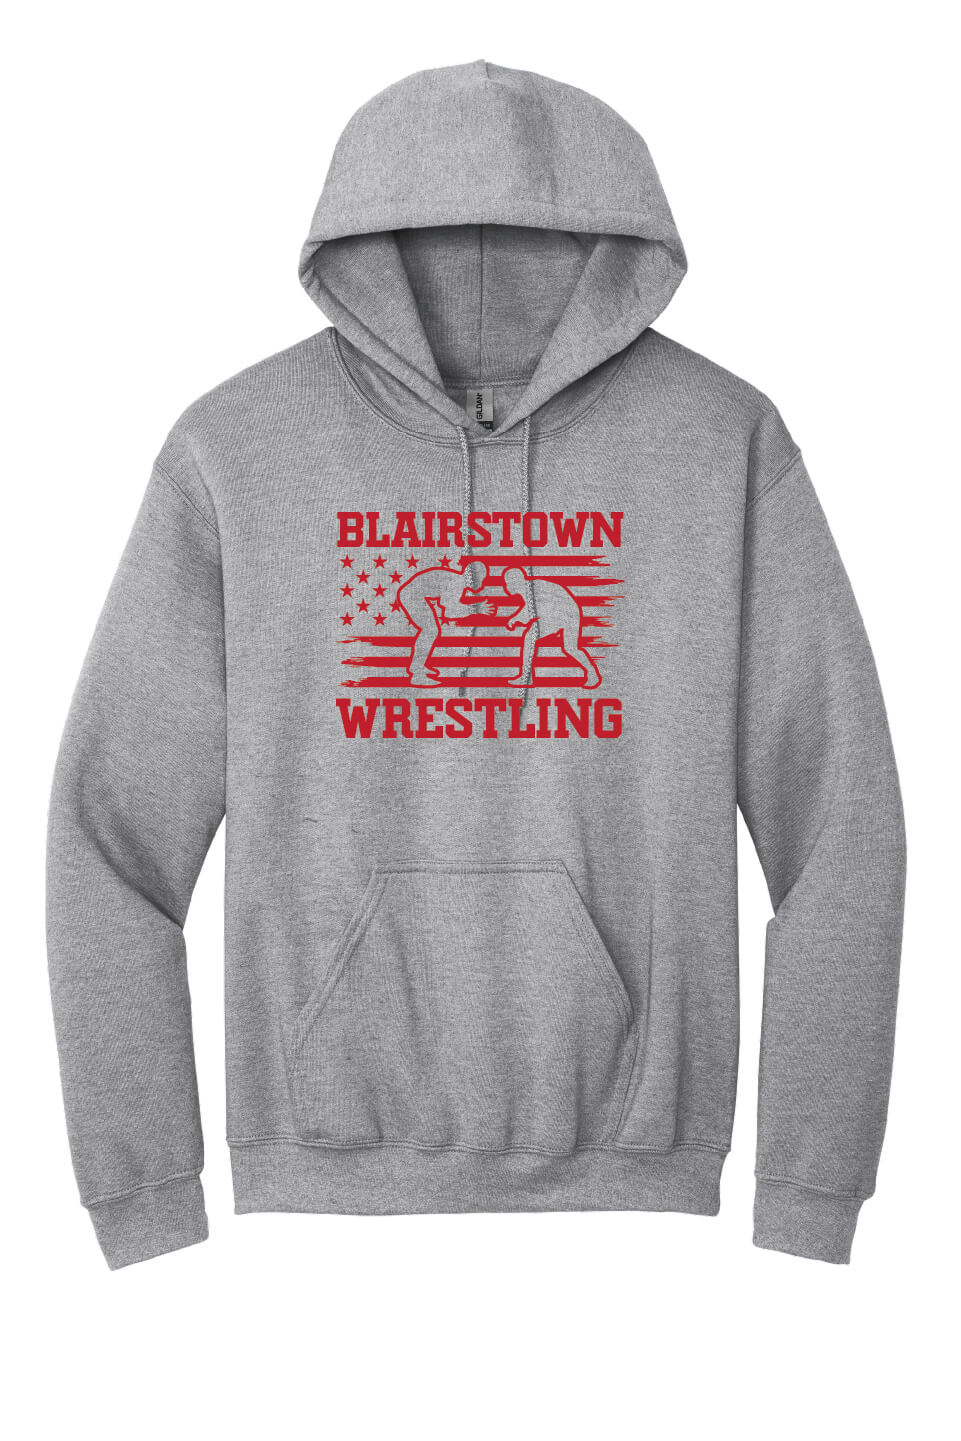 Blairstown Wrestling Flag Hoodie (Youth) gray